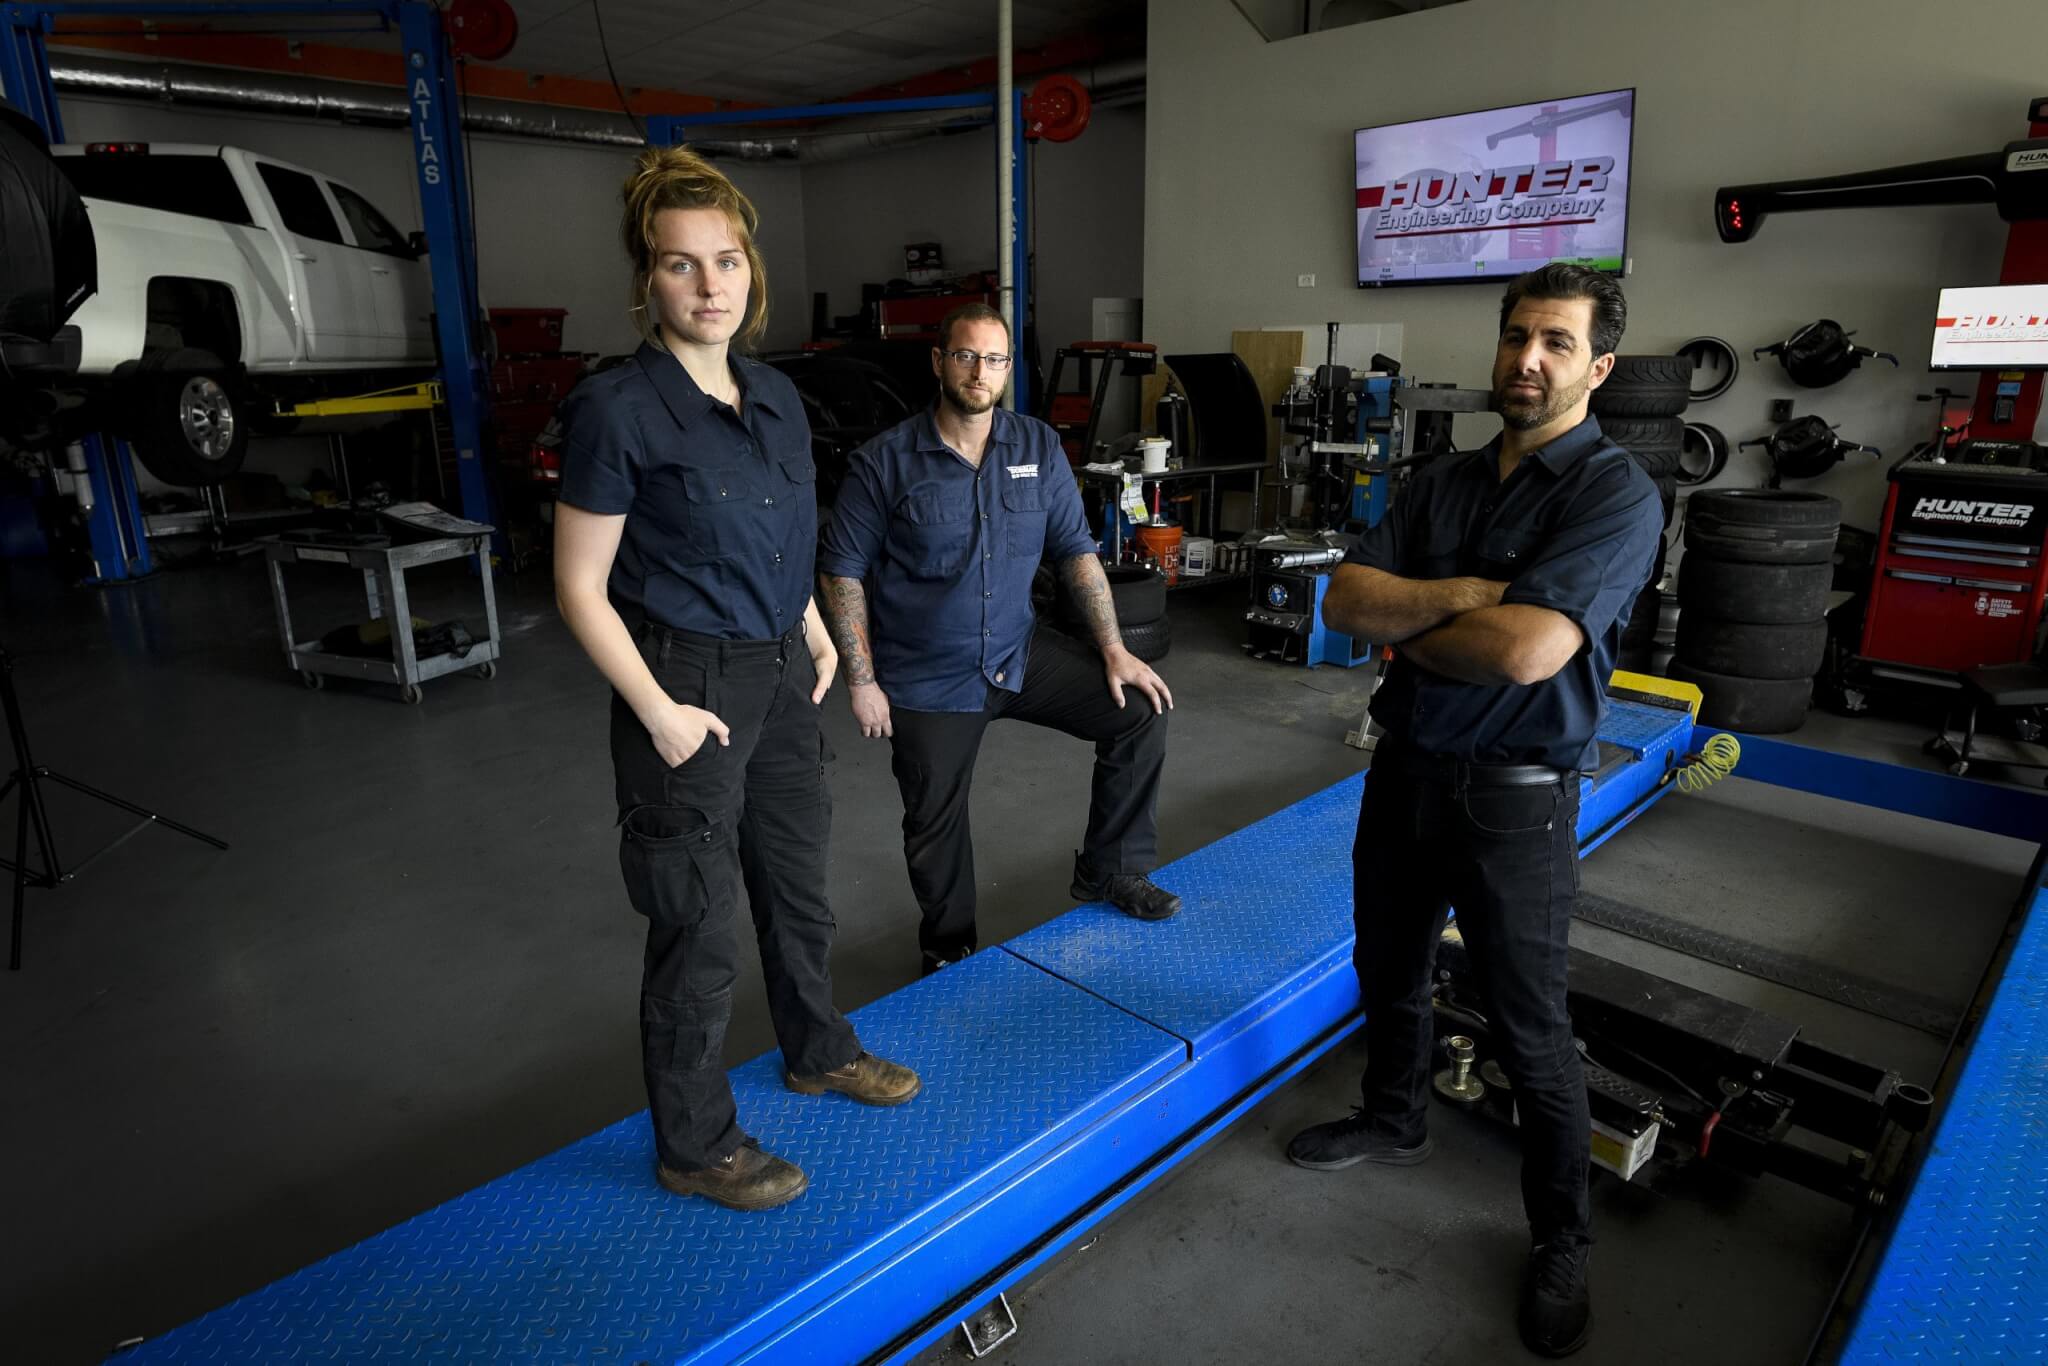 THree techs standing in an automotive shop